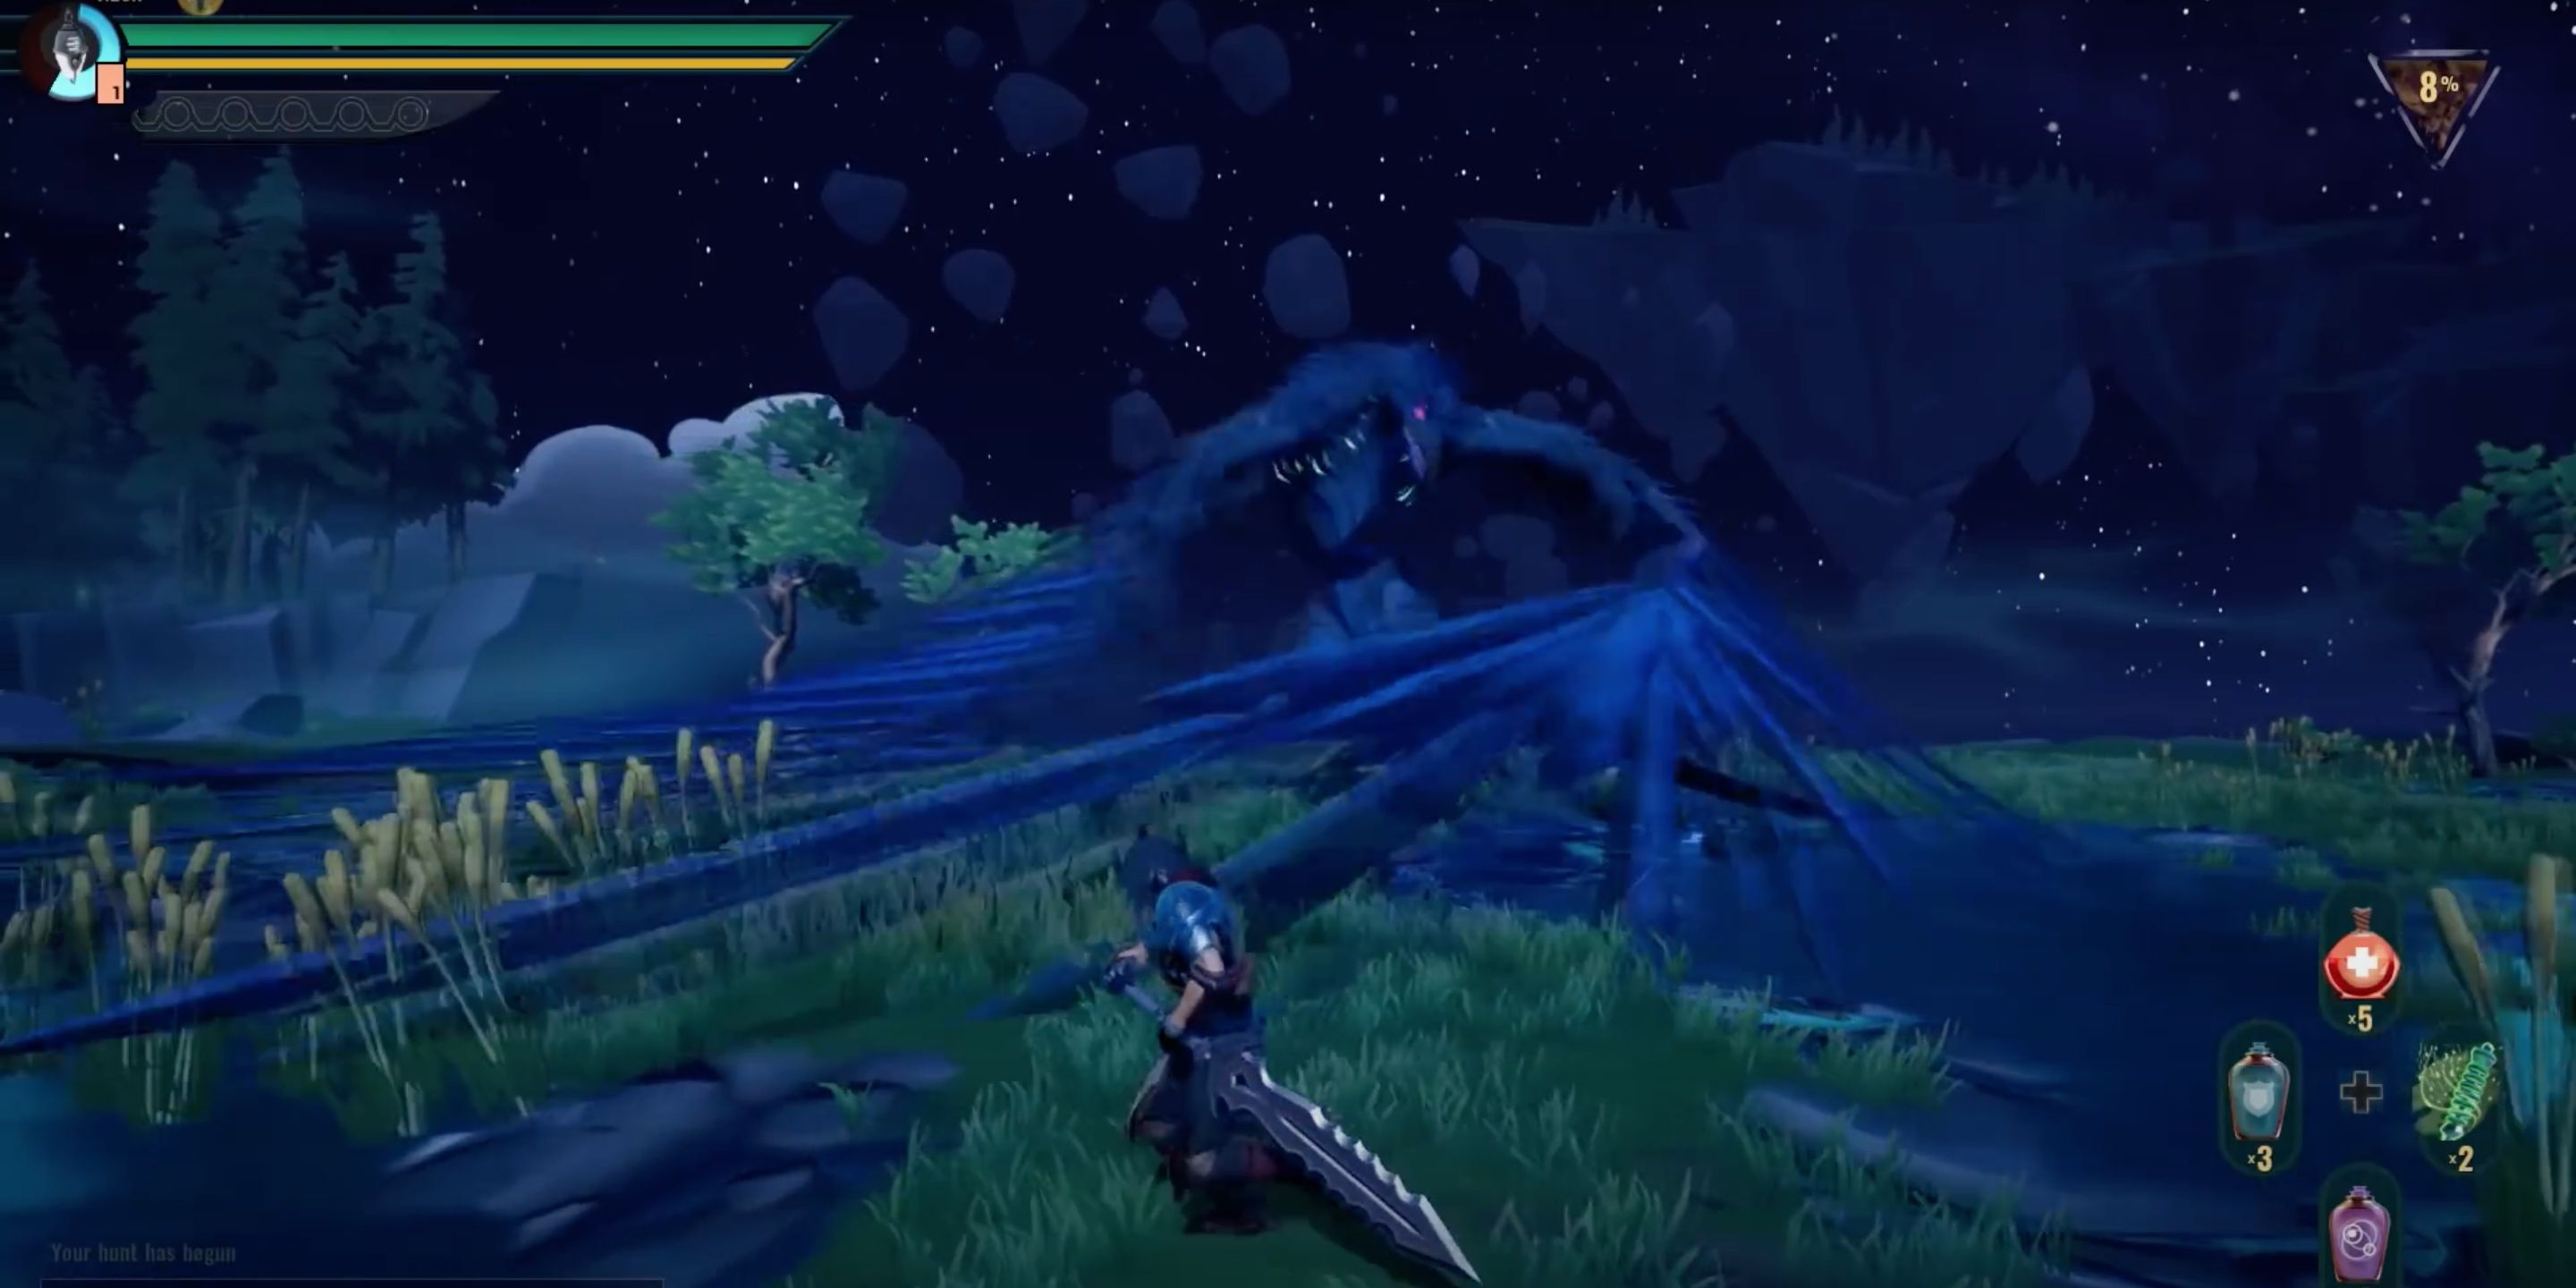 Player sidestepping Shrowd's sweep attack in Dauntless